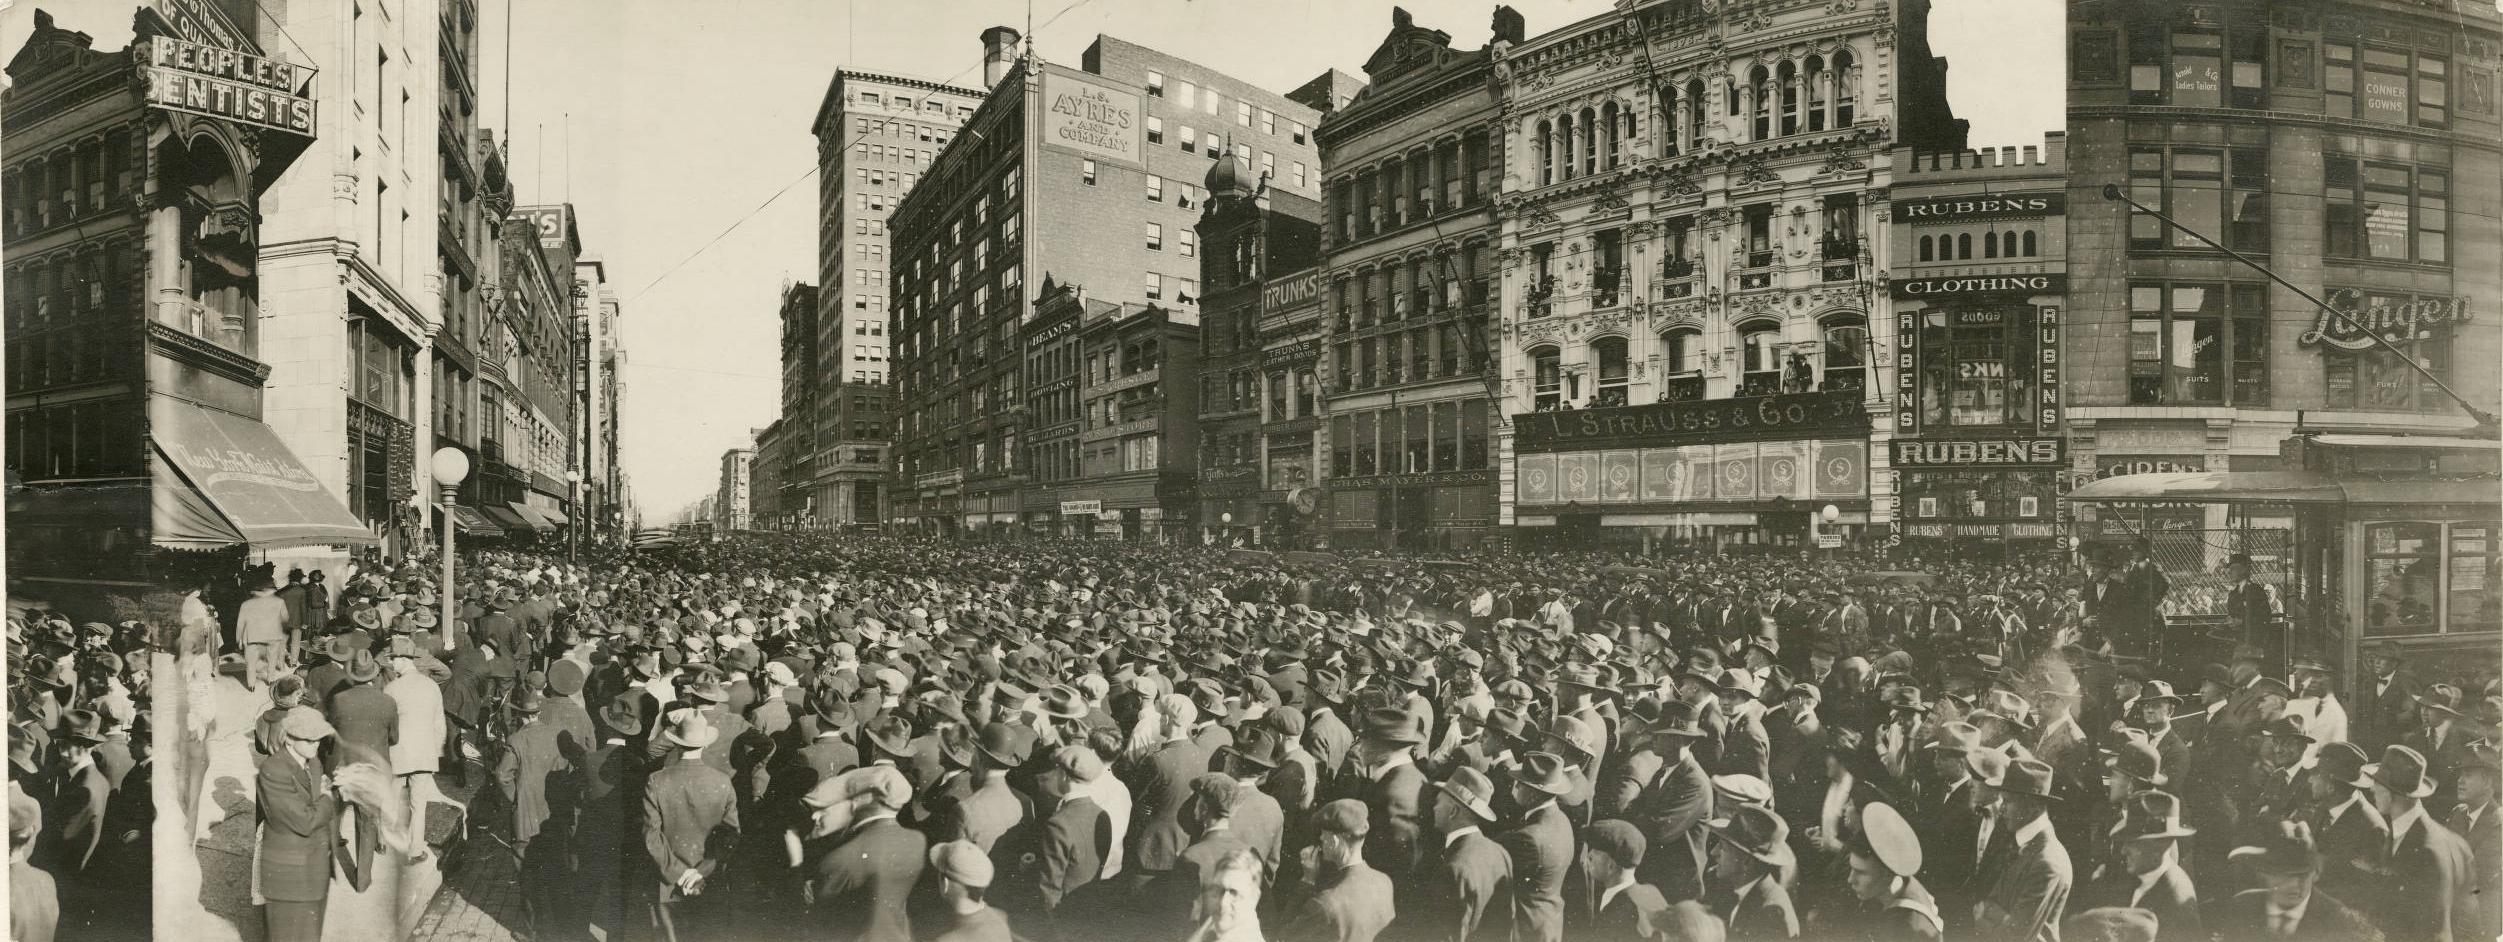 A large crowd of people completely fill a city street.